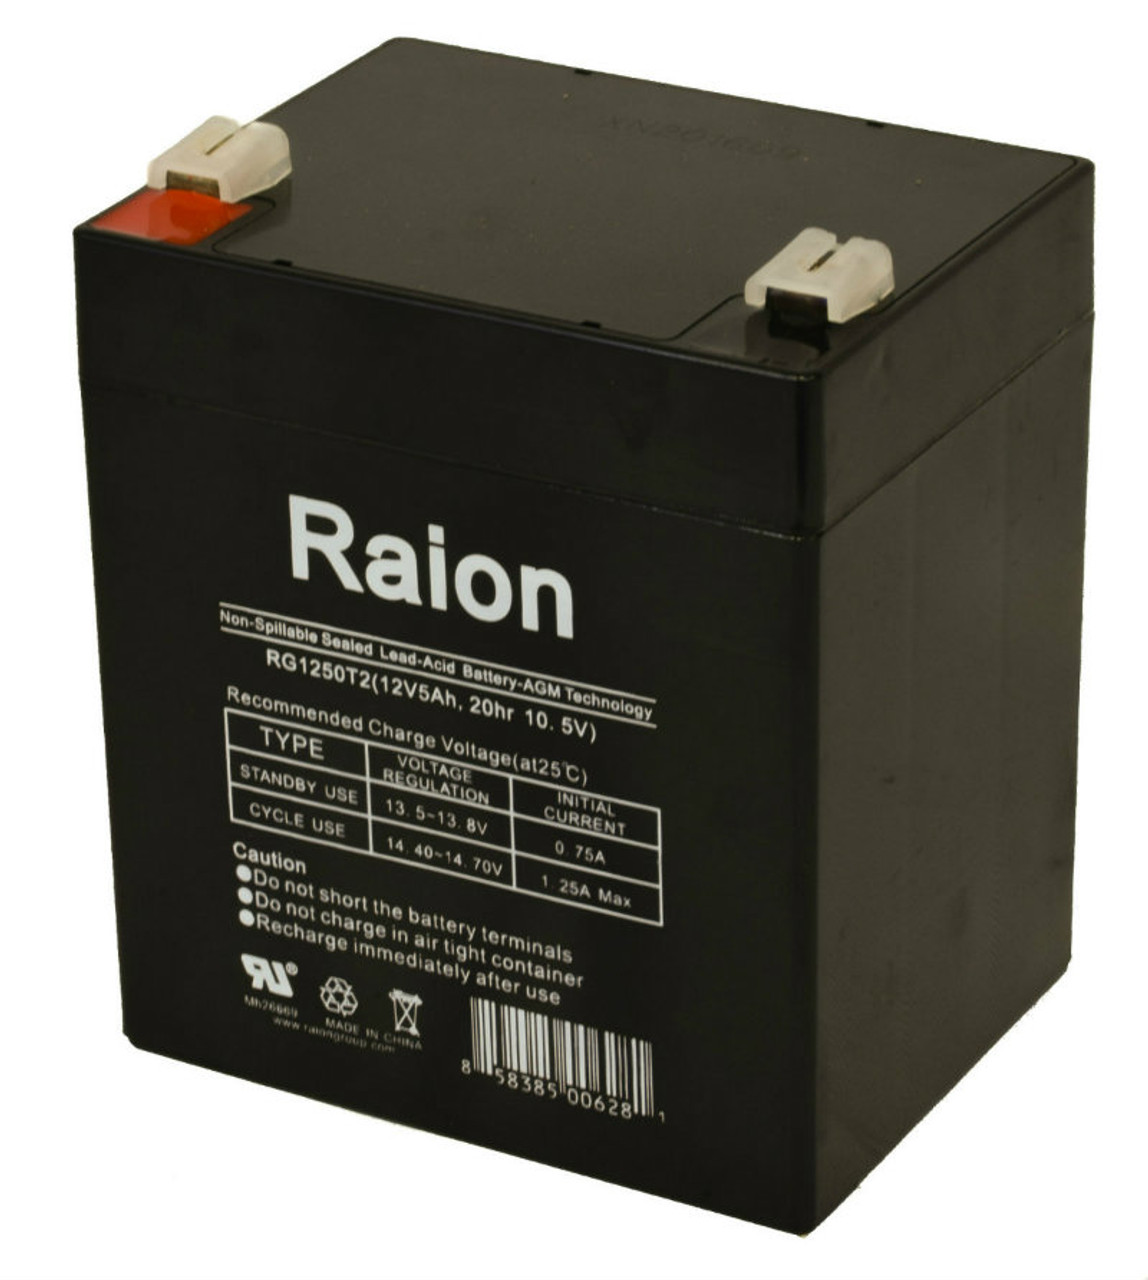 Raion Power RG1250T1 Replacement Battery for Philips C-3 Patient Monitor